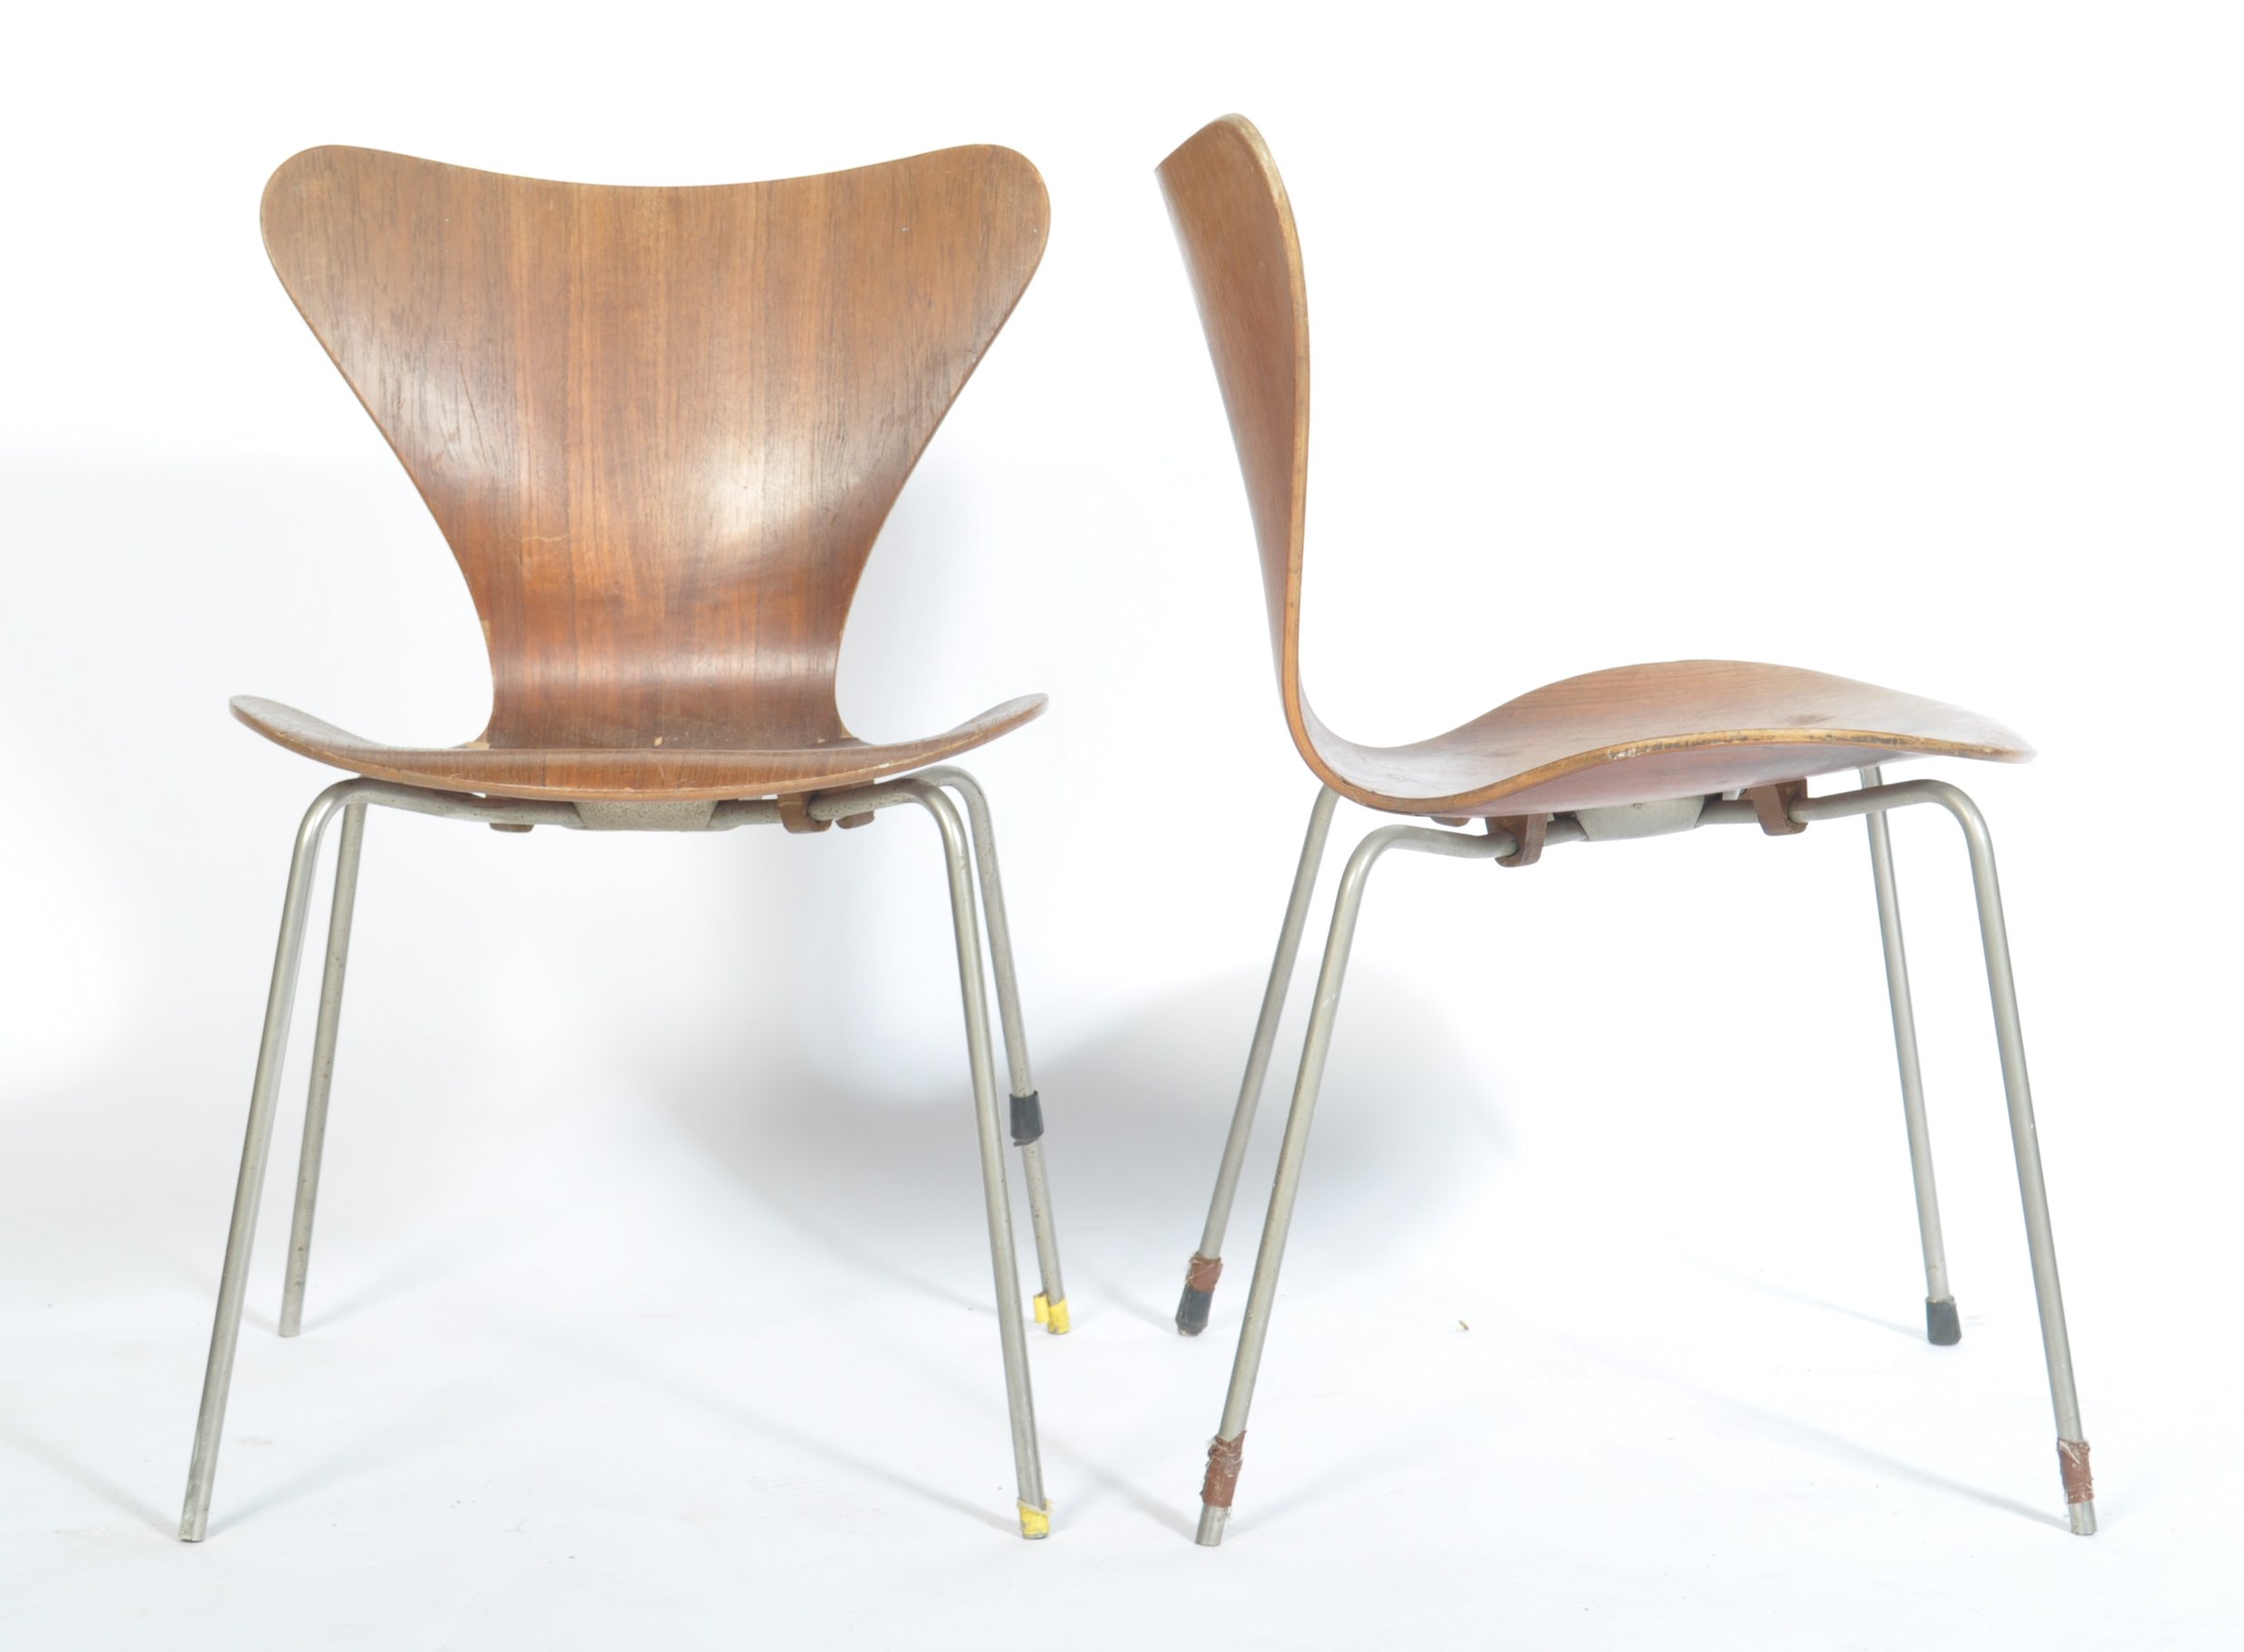 MODEL 3107 PAIR OF RETRO DINING CHAIRS BY ARNE JACOBSEN FOR FRITZ HANSEN - Image 3 of 5